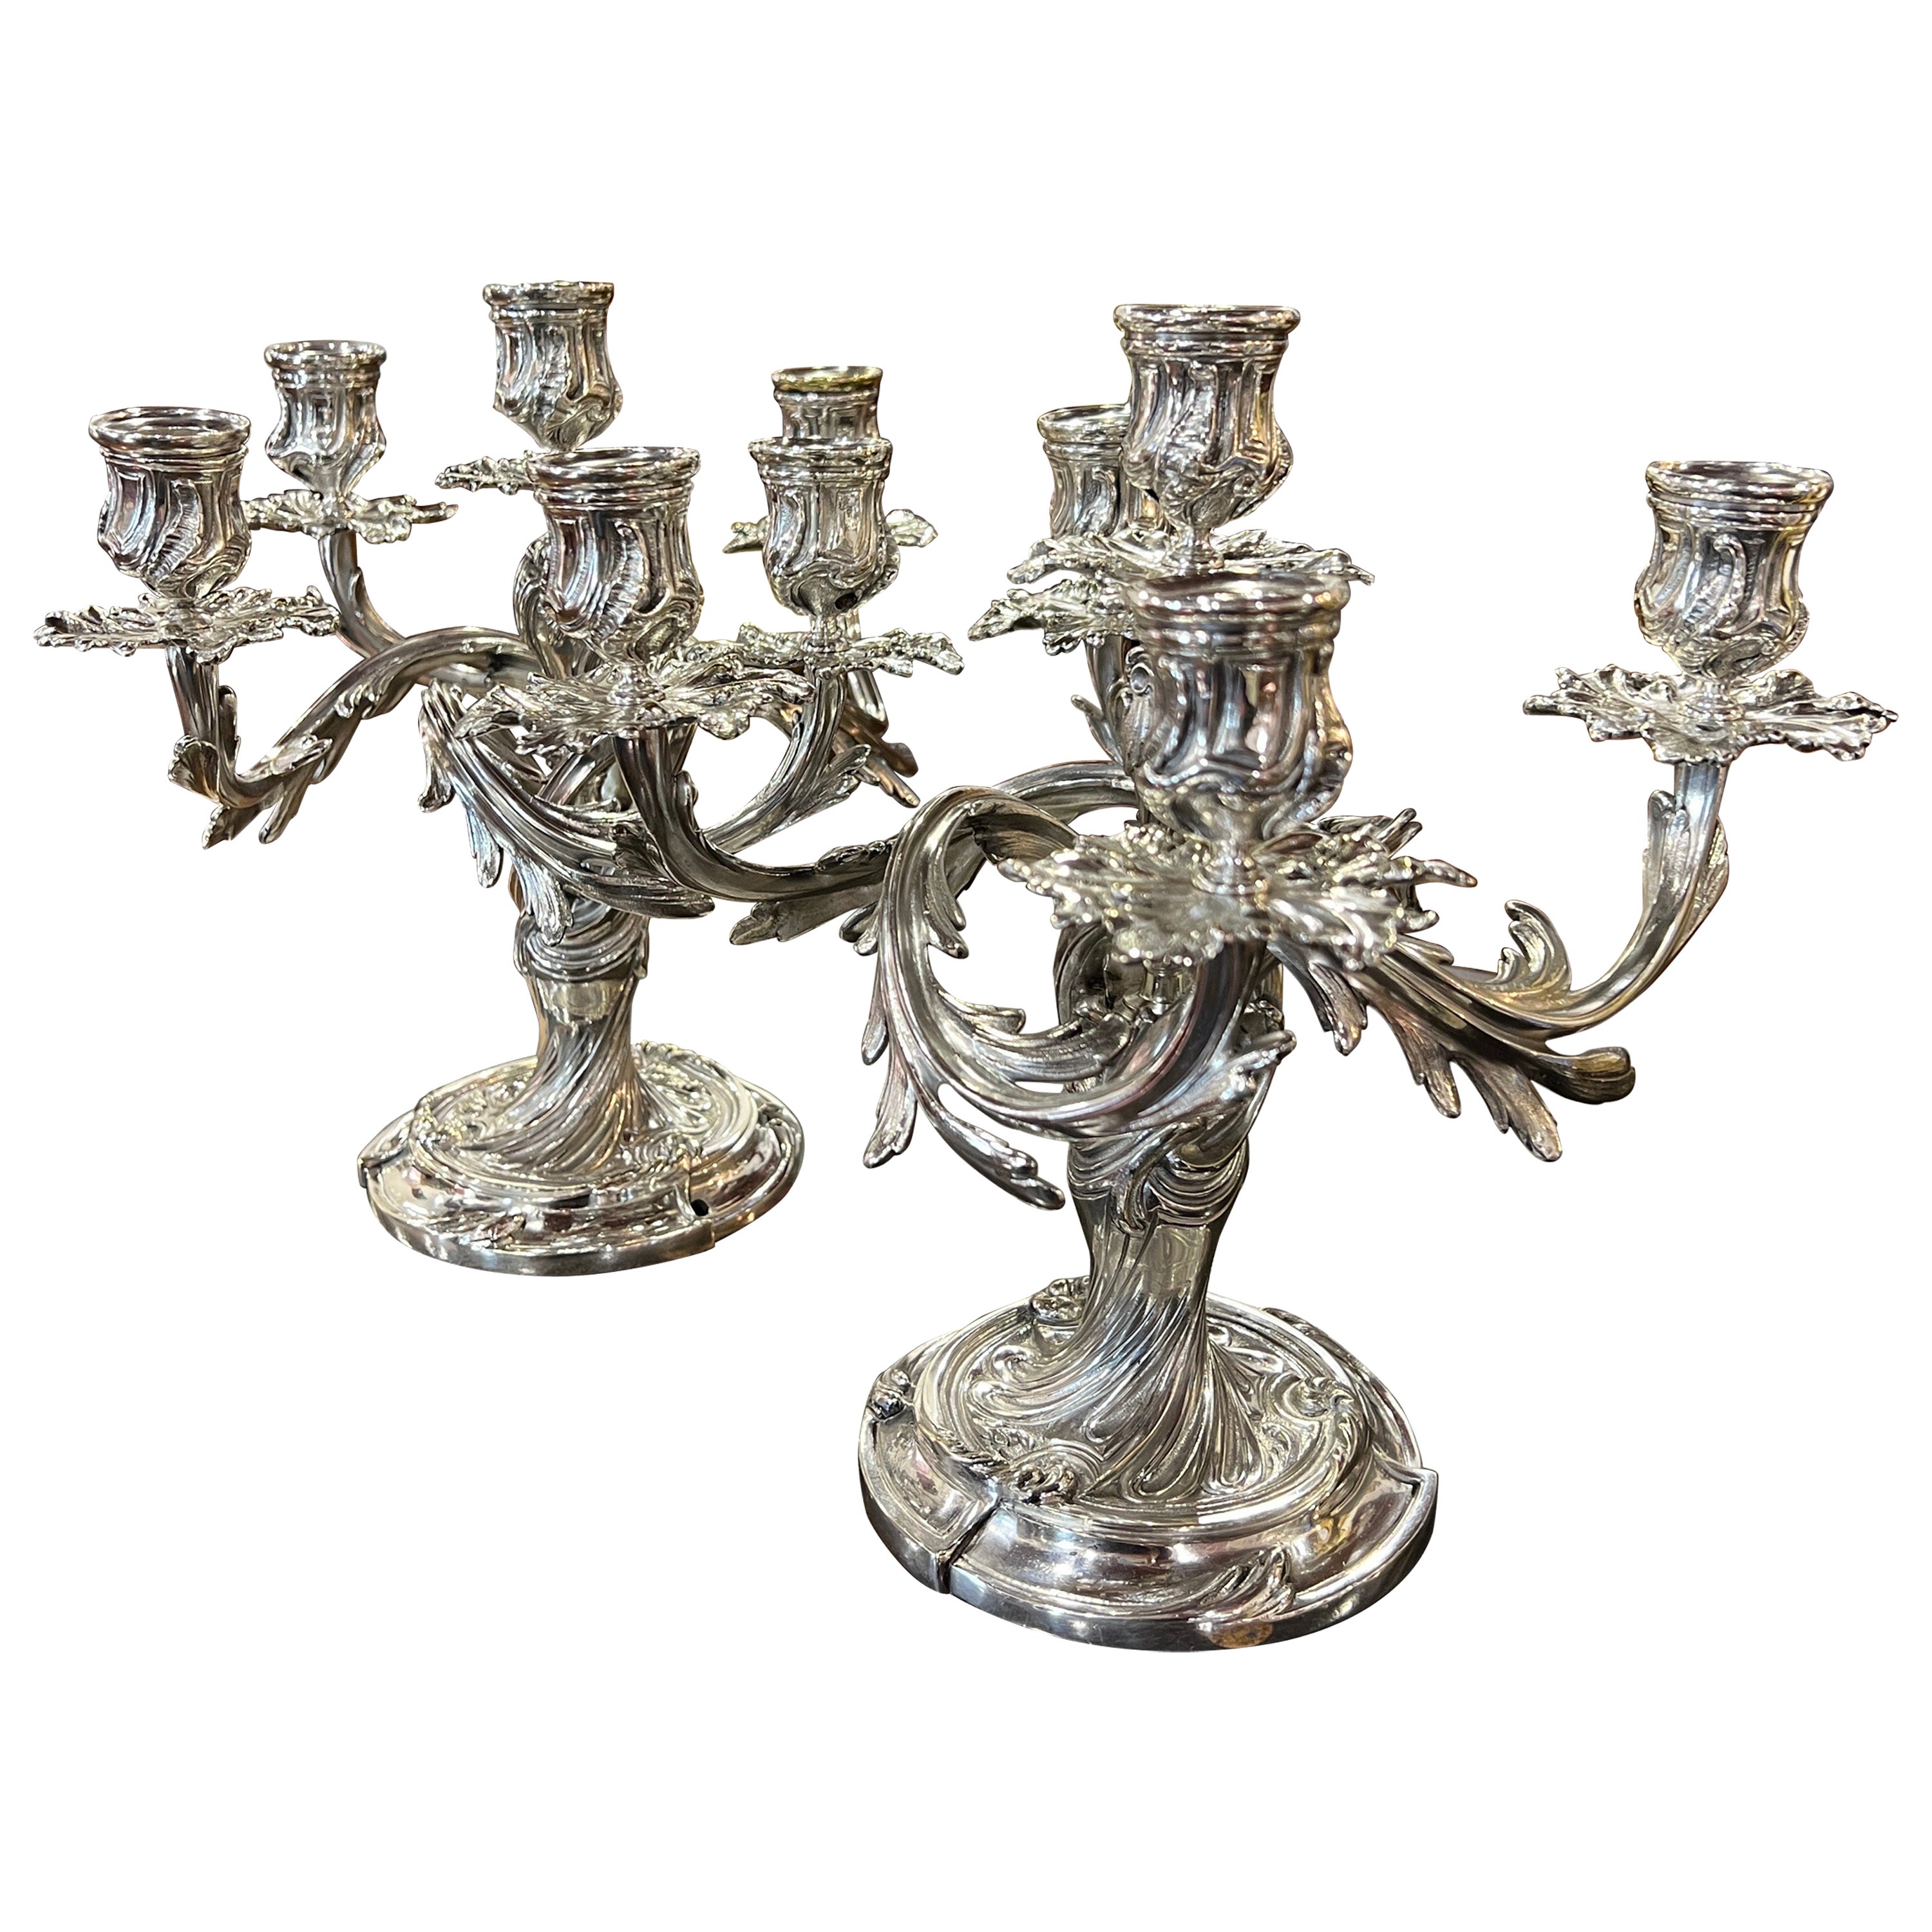 20th Century Pair of Bronze Silvered Candelabras Signed Christofle